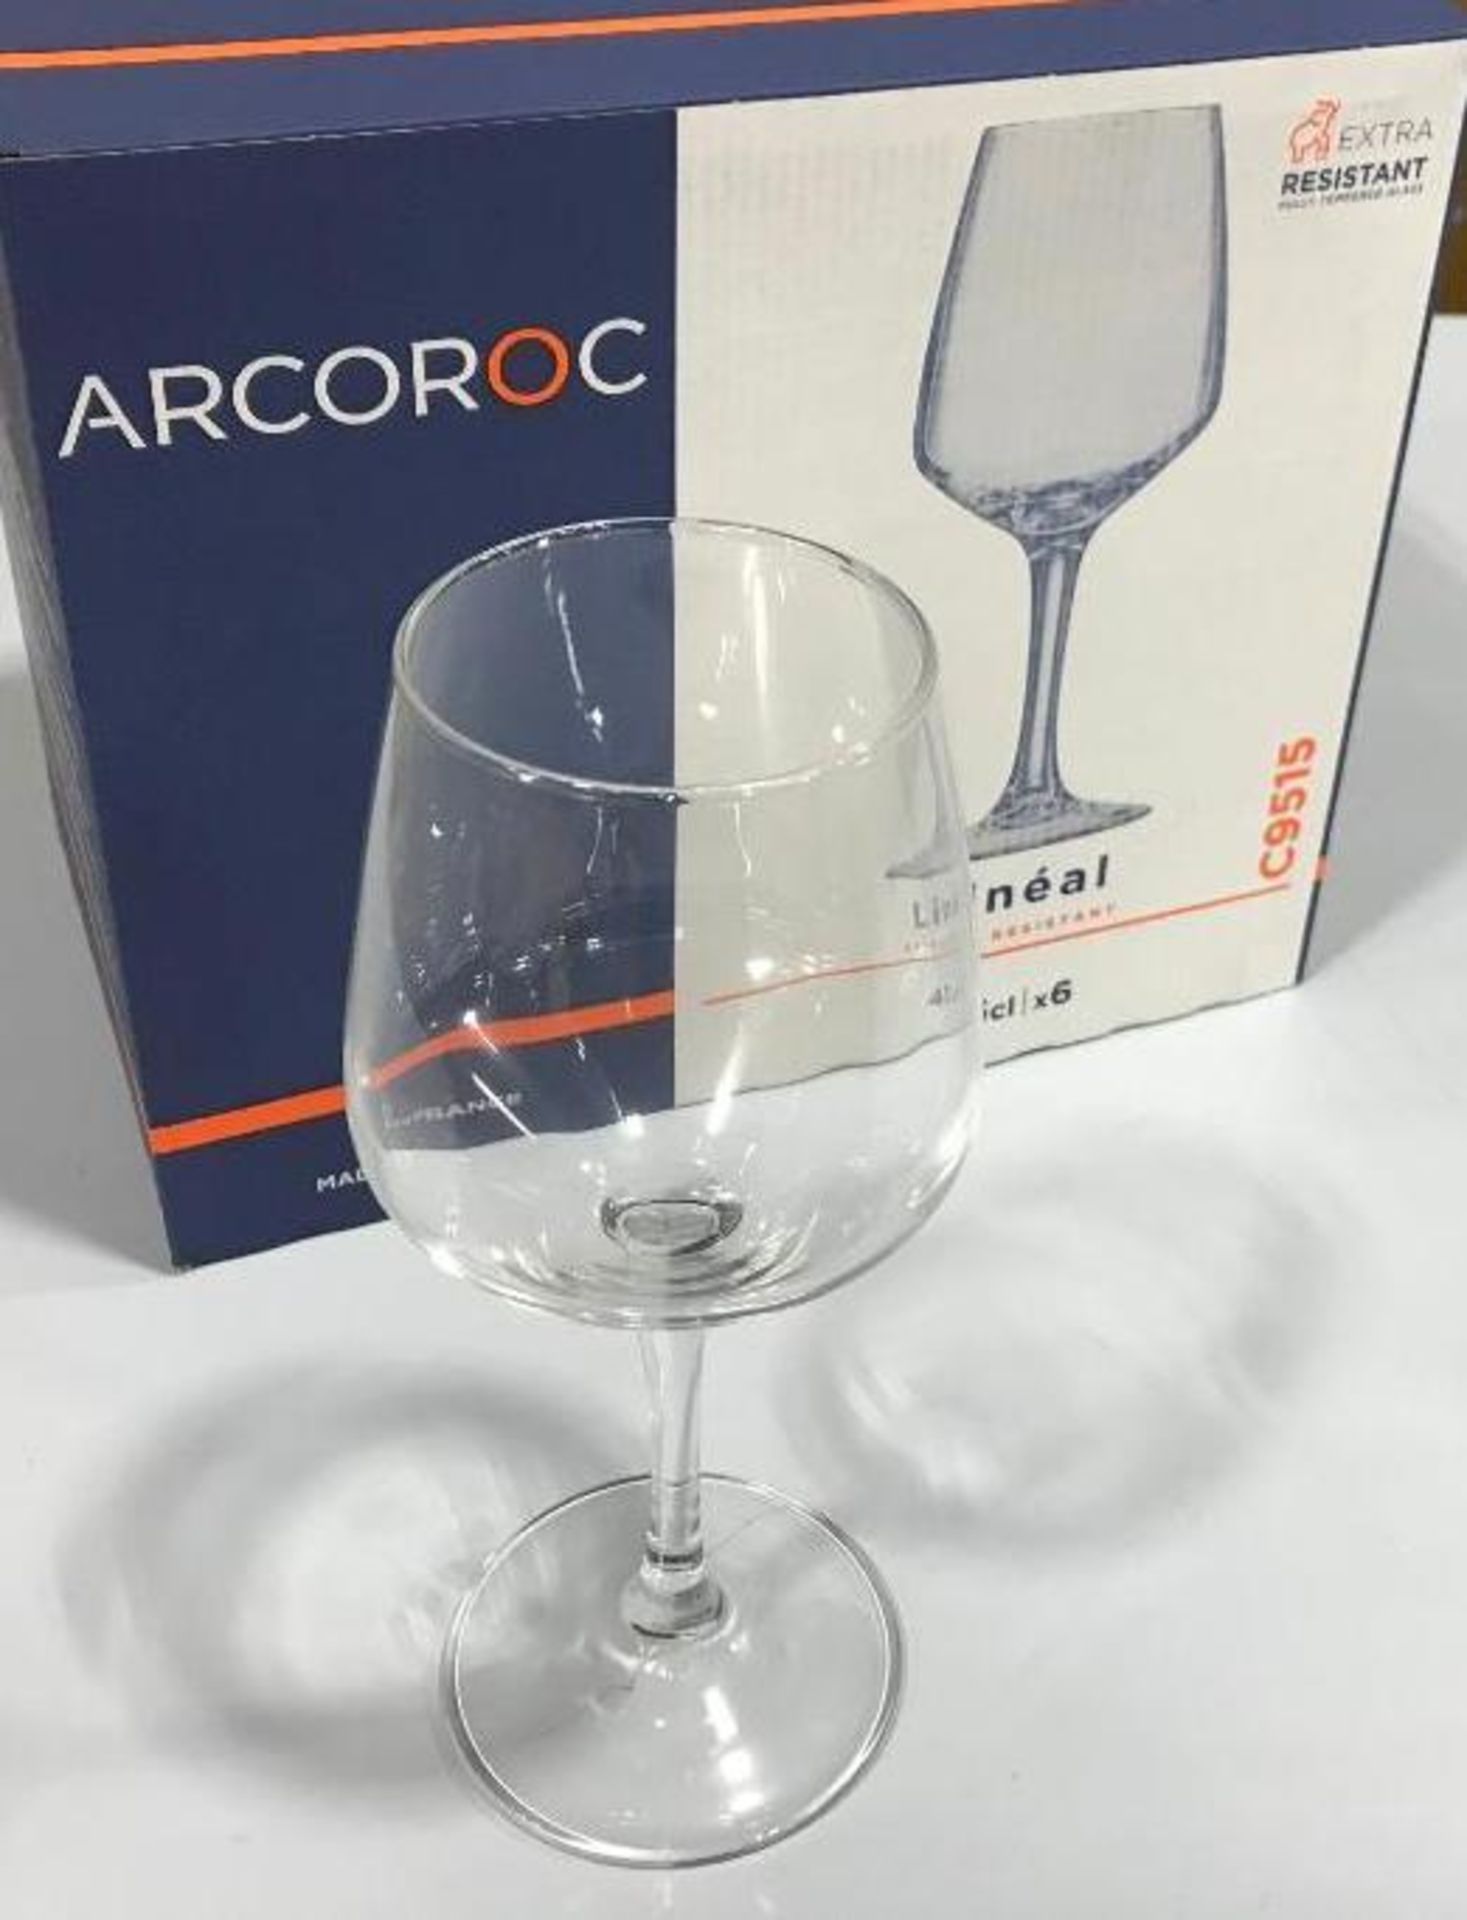 1 BOX OF 6 ARCOROC C9515 LINEAL 15 OZ. WINE GLASS BY ARC CARDINAL, MADE IN FRANCE - NEW